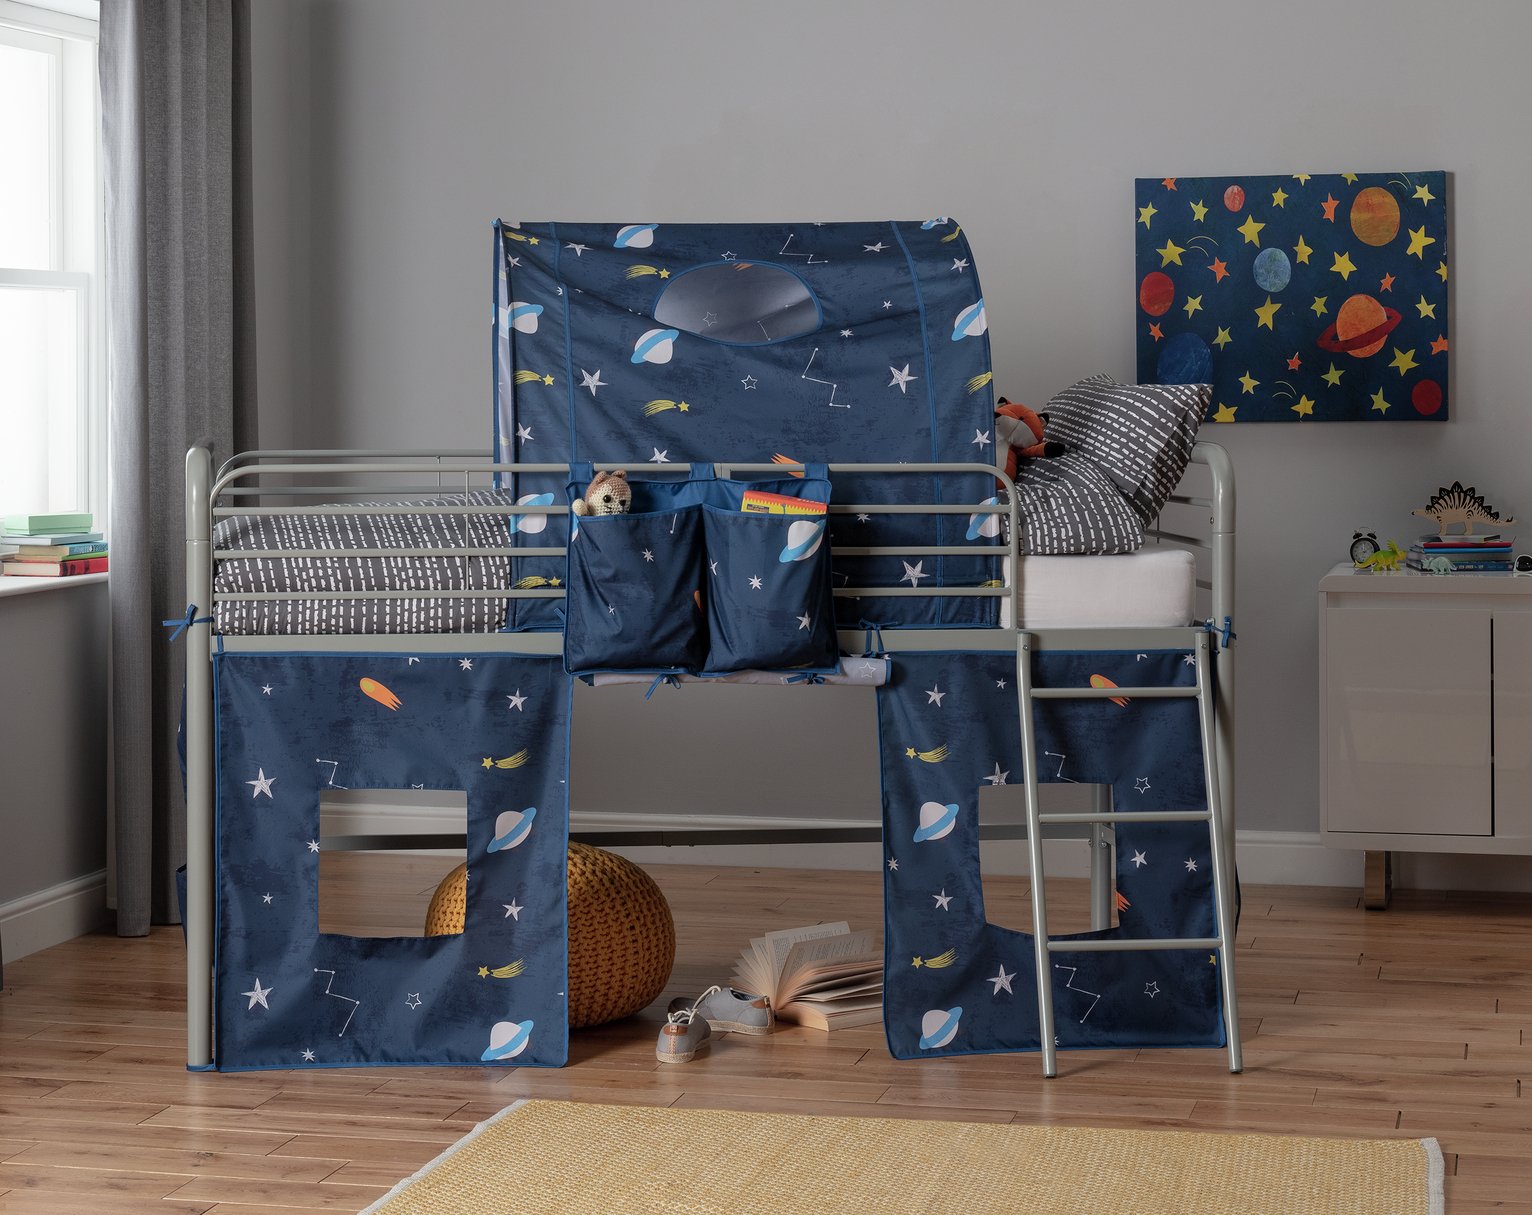 Argos Home Space Tunnel & Tent for Kids Mid Sleeper Review